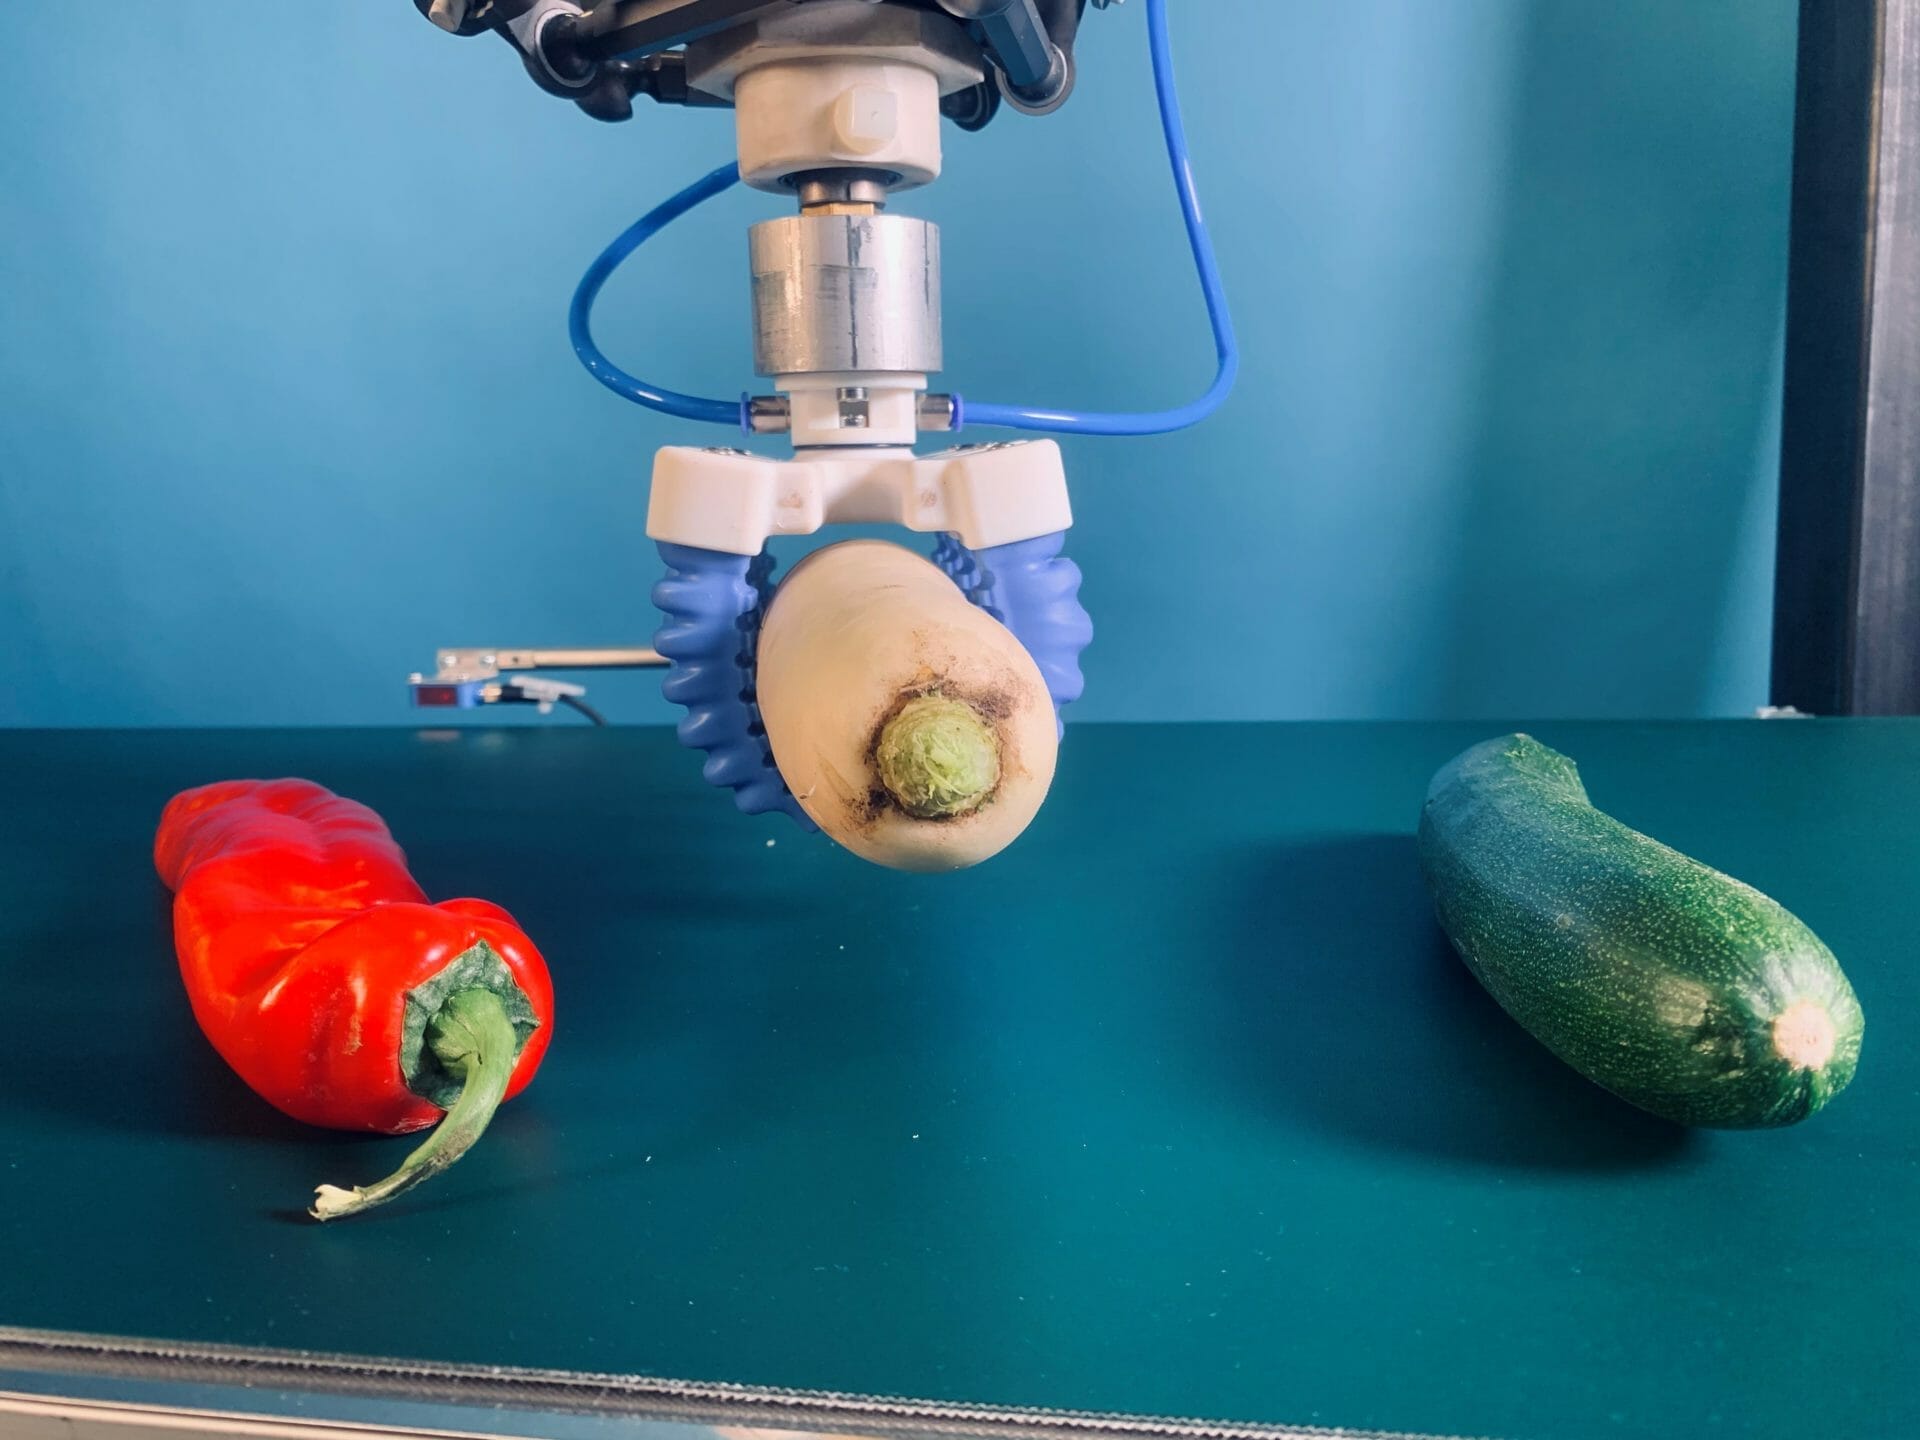 handling peppers, reddishes and cucumbers using a soft robotic gripper